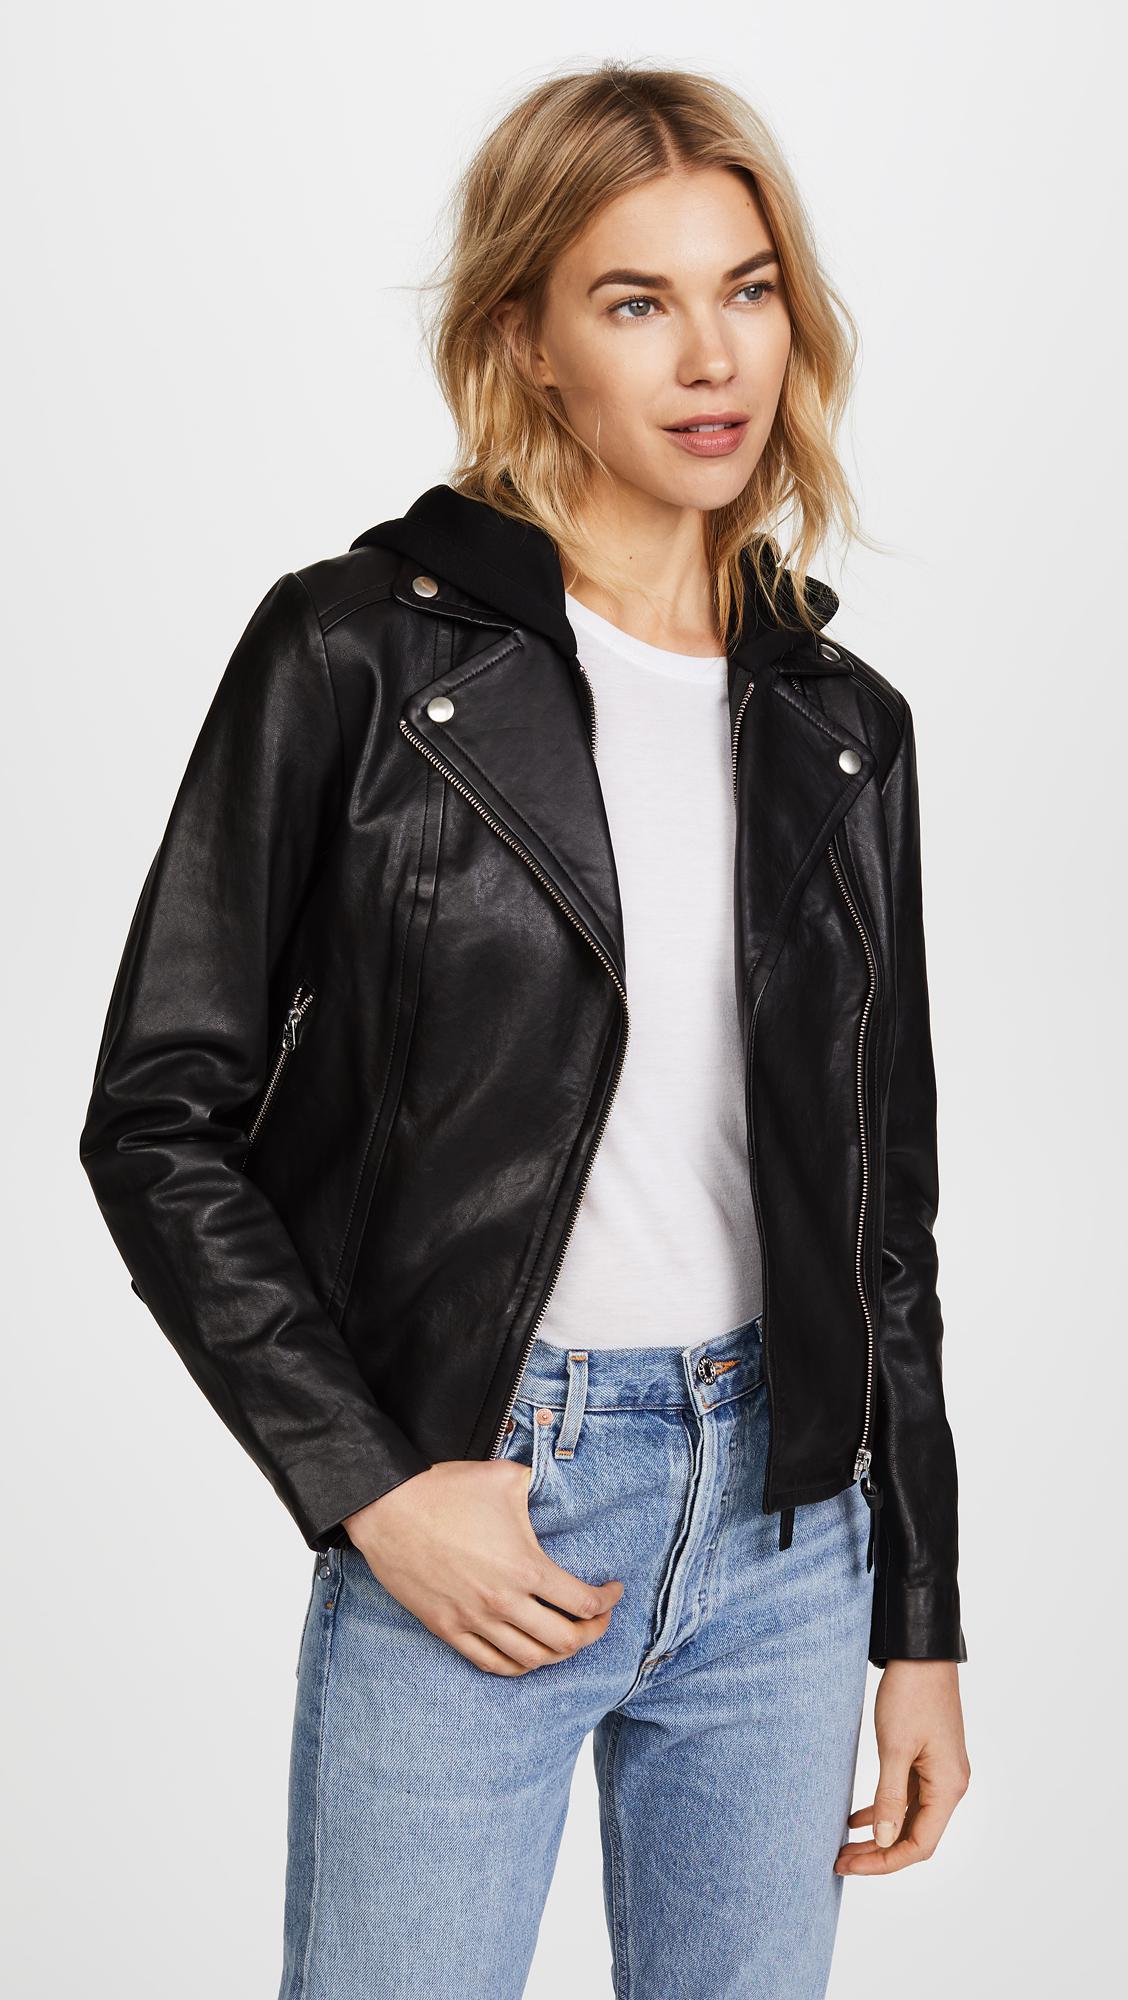 Mackage Yoana Leather Jacket in Black (Natural) - Lyst